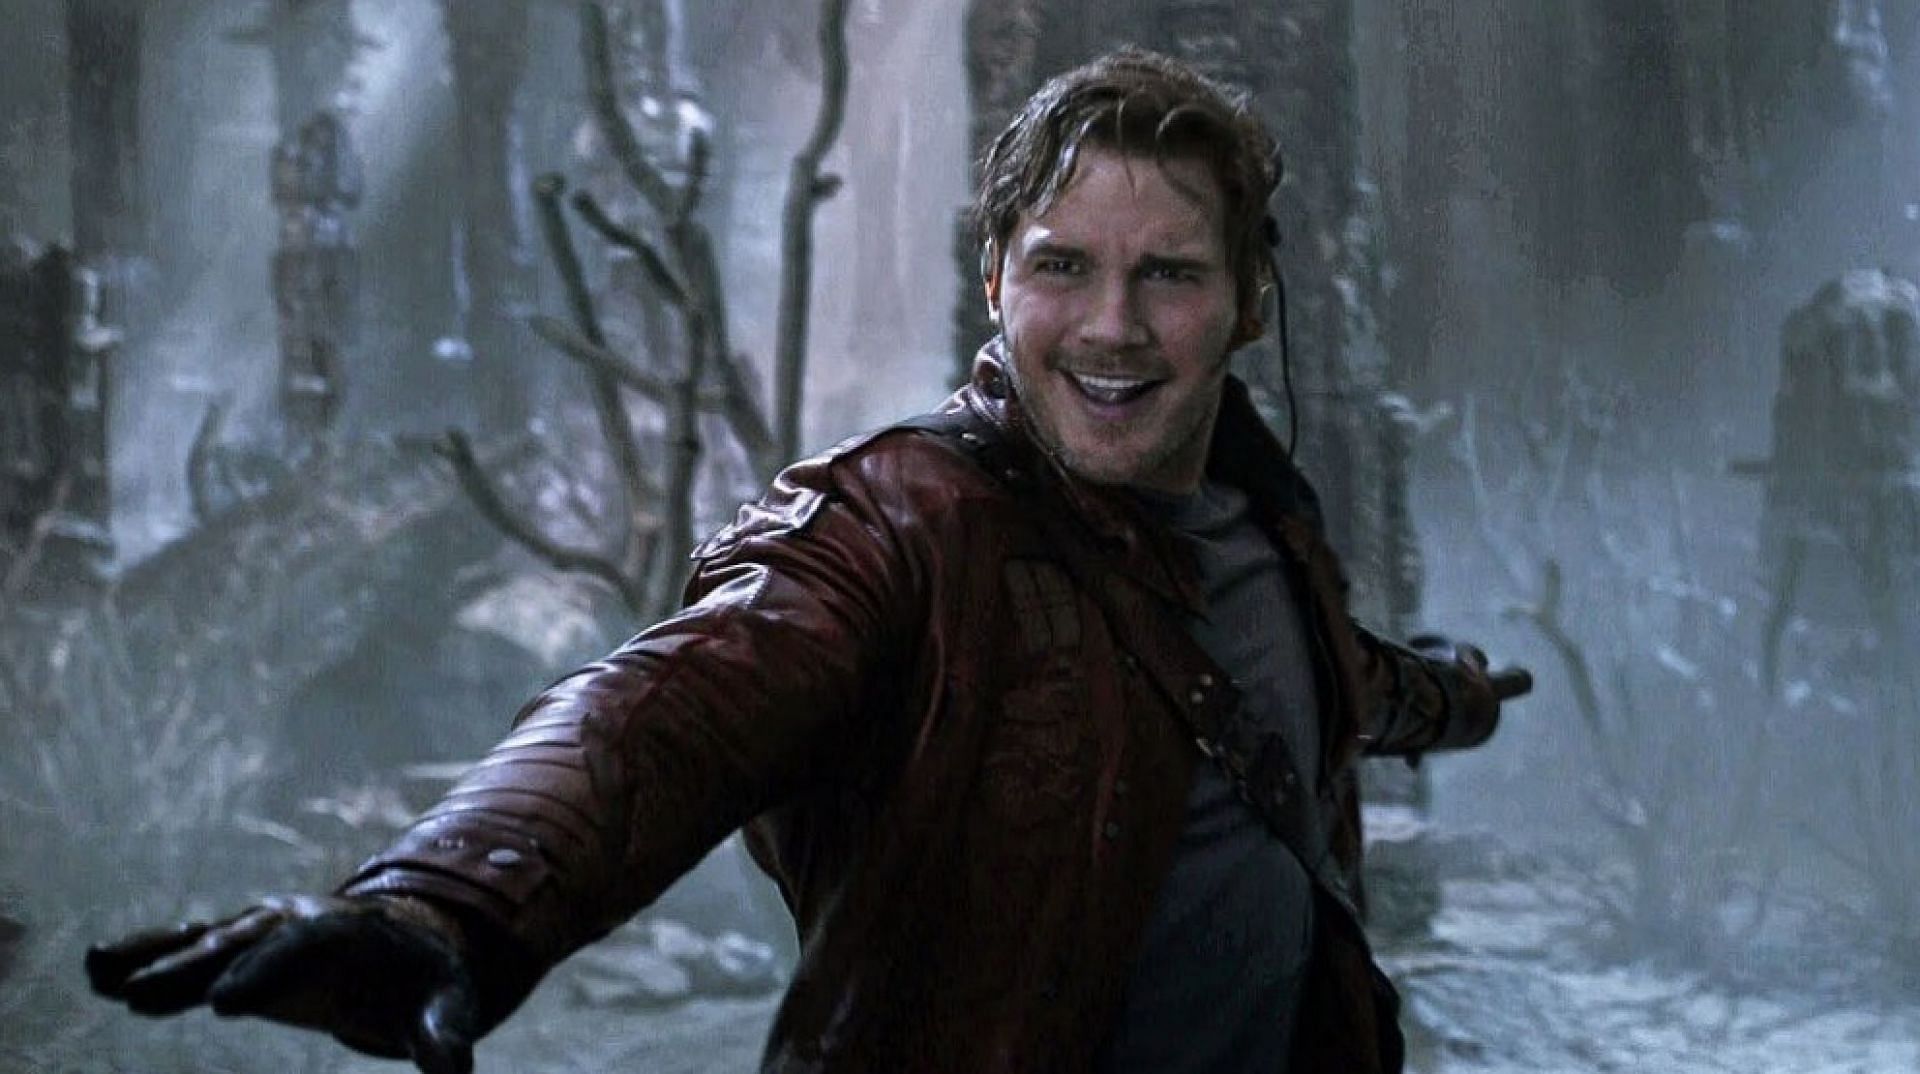 Star-Lord dances to the beat of his Walkman in Guardians of the Galaxy (Image via Marvel Studios)